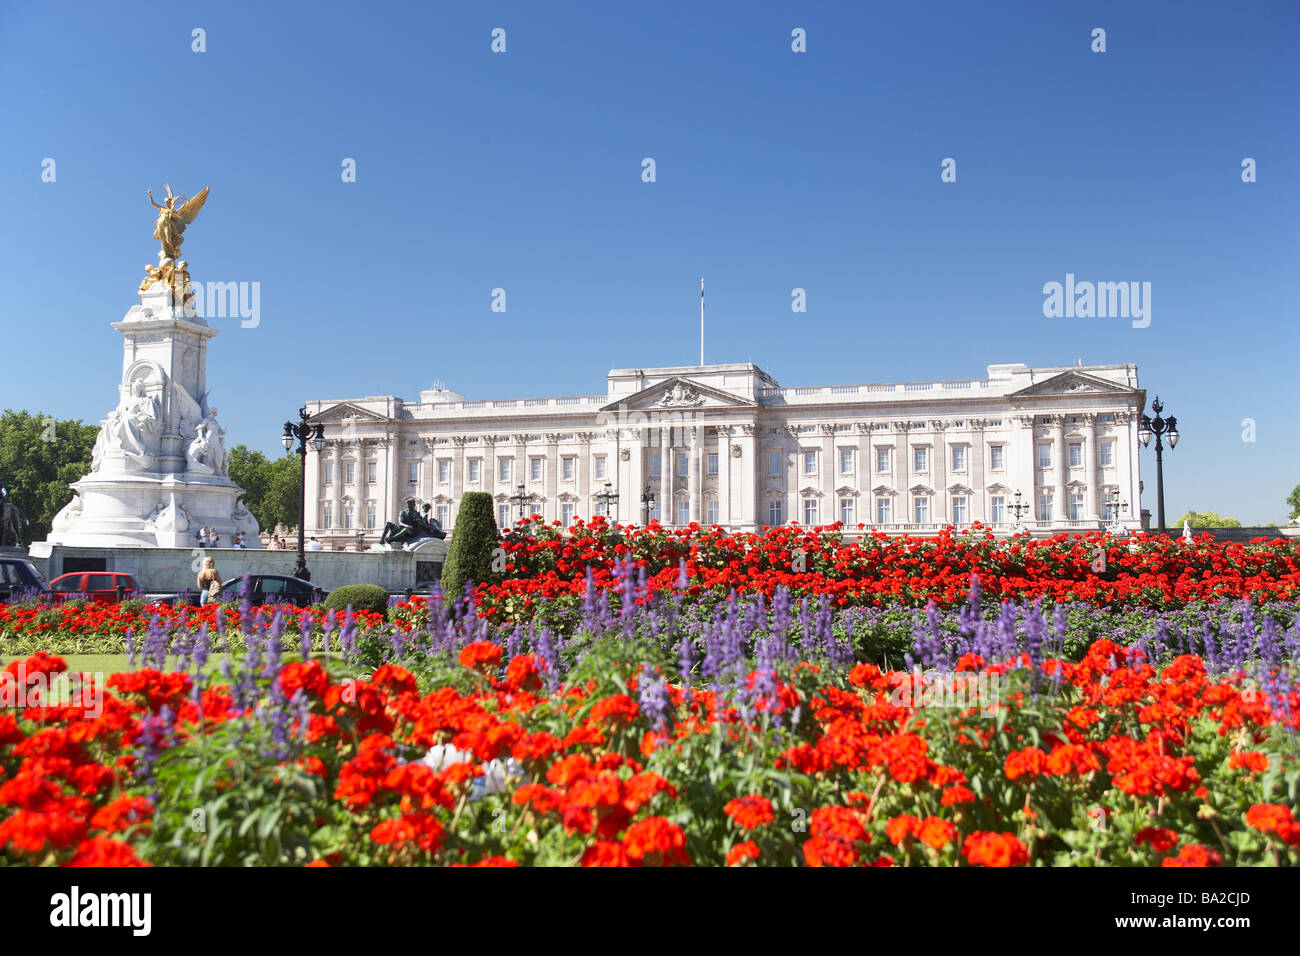 Buckingham Palace With Flowers Blooming In The Queen's Garden, London, England Stock Photo